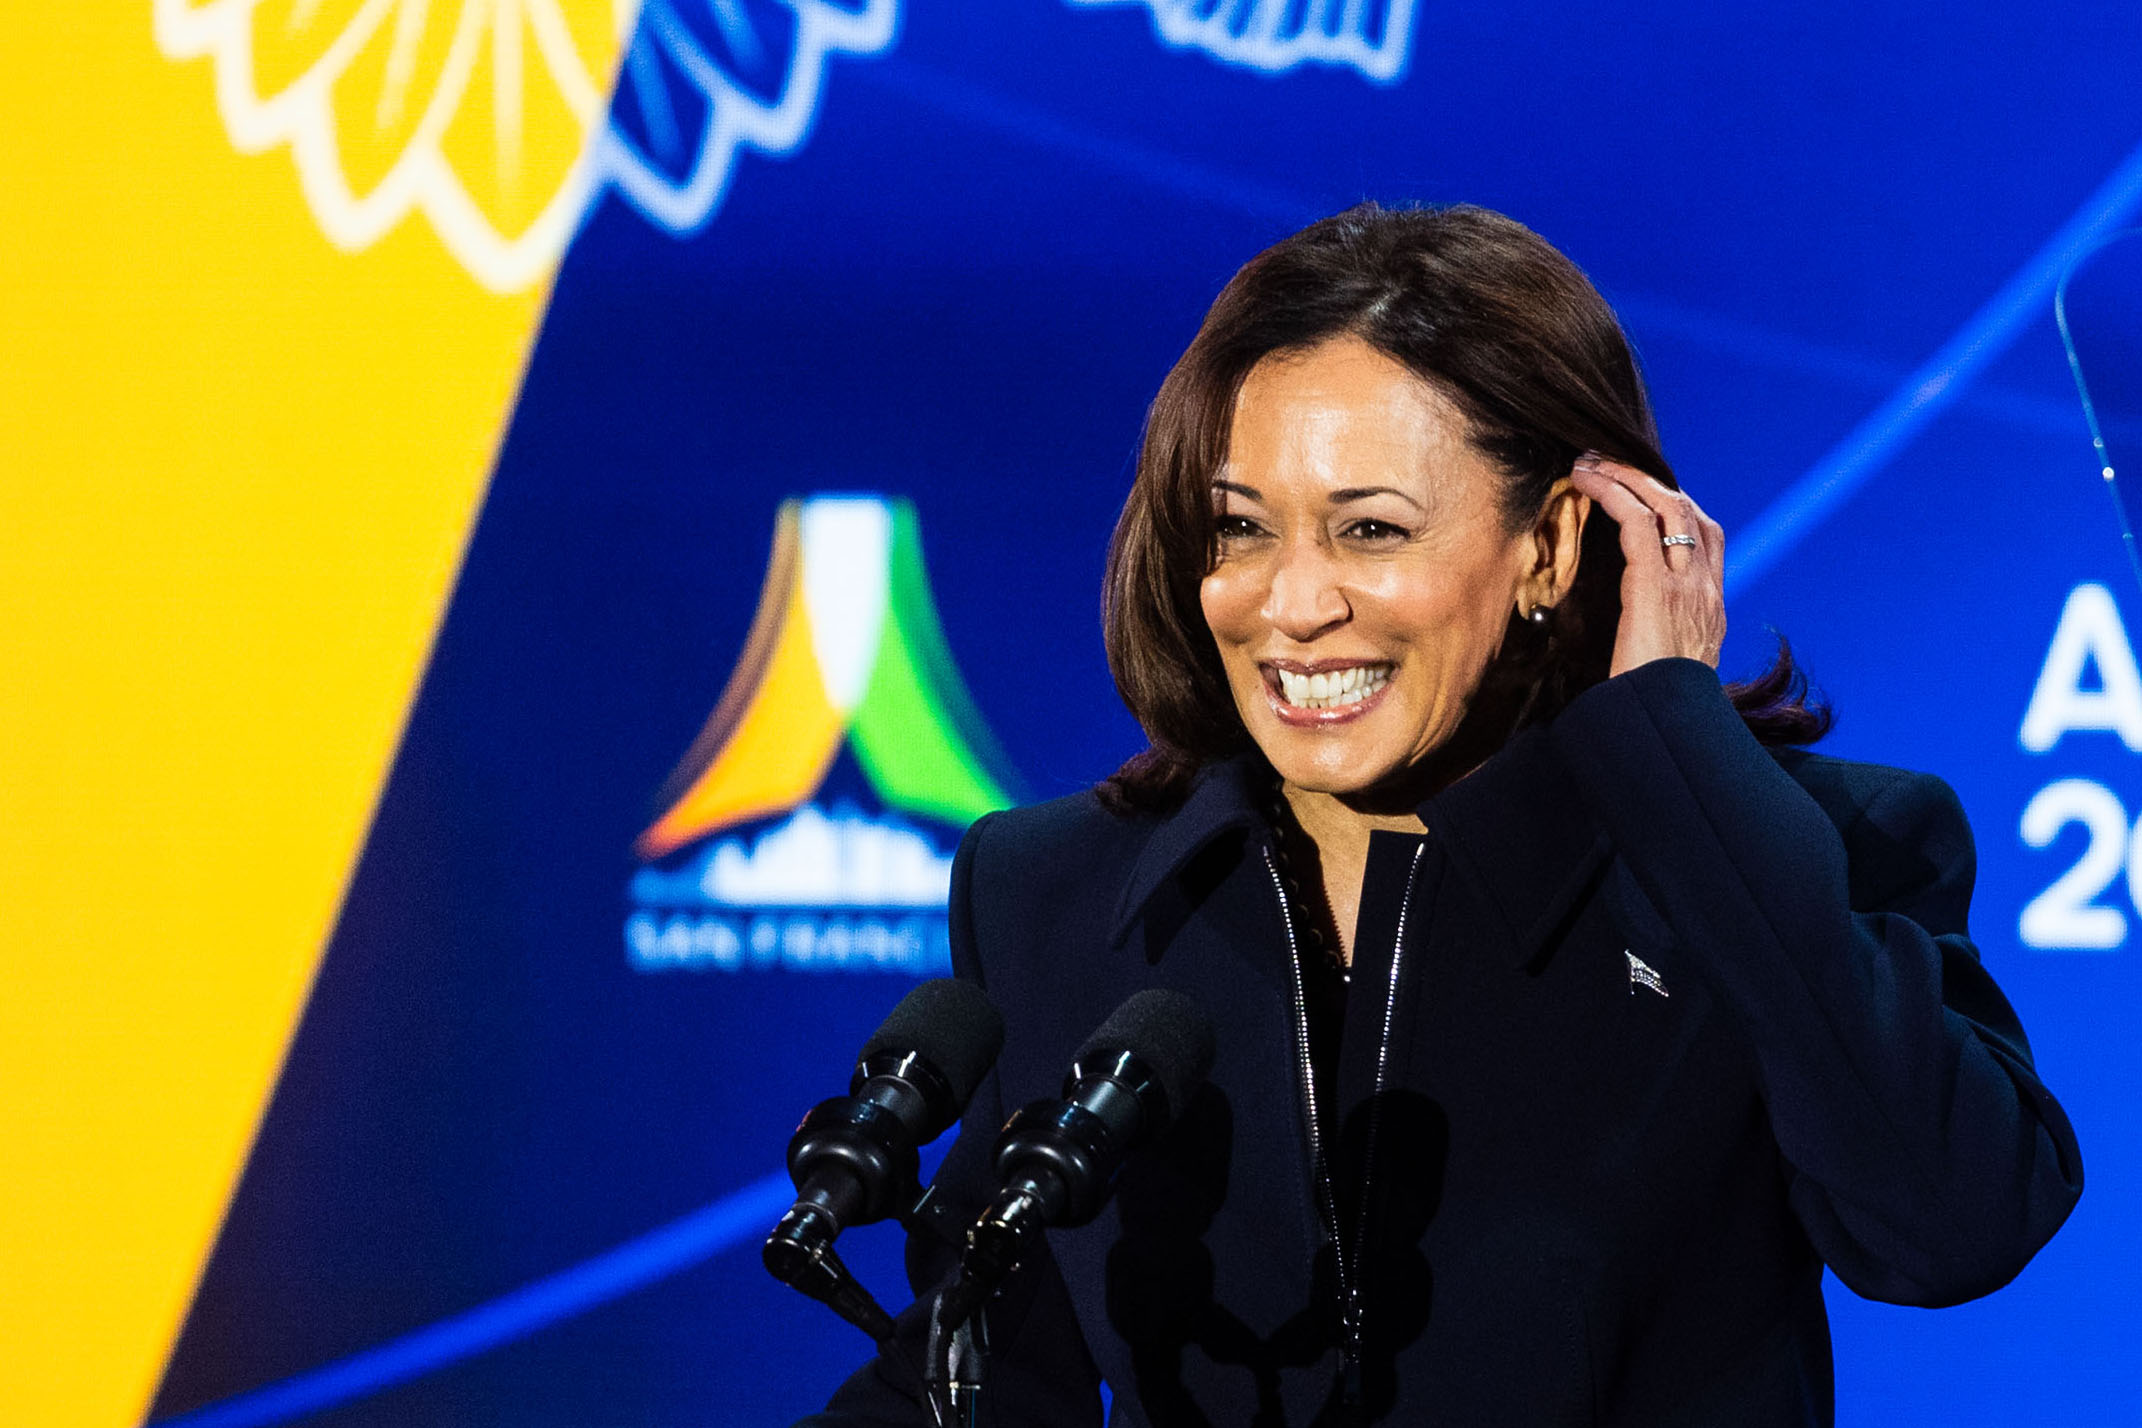 A woman smiles, touching her ear, standing at a podium with microphones, against a vibrant logo backdrop.